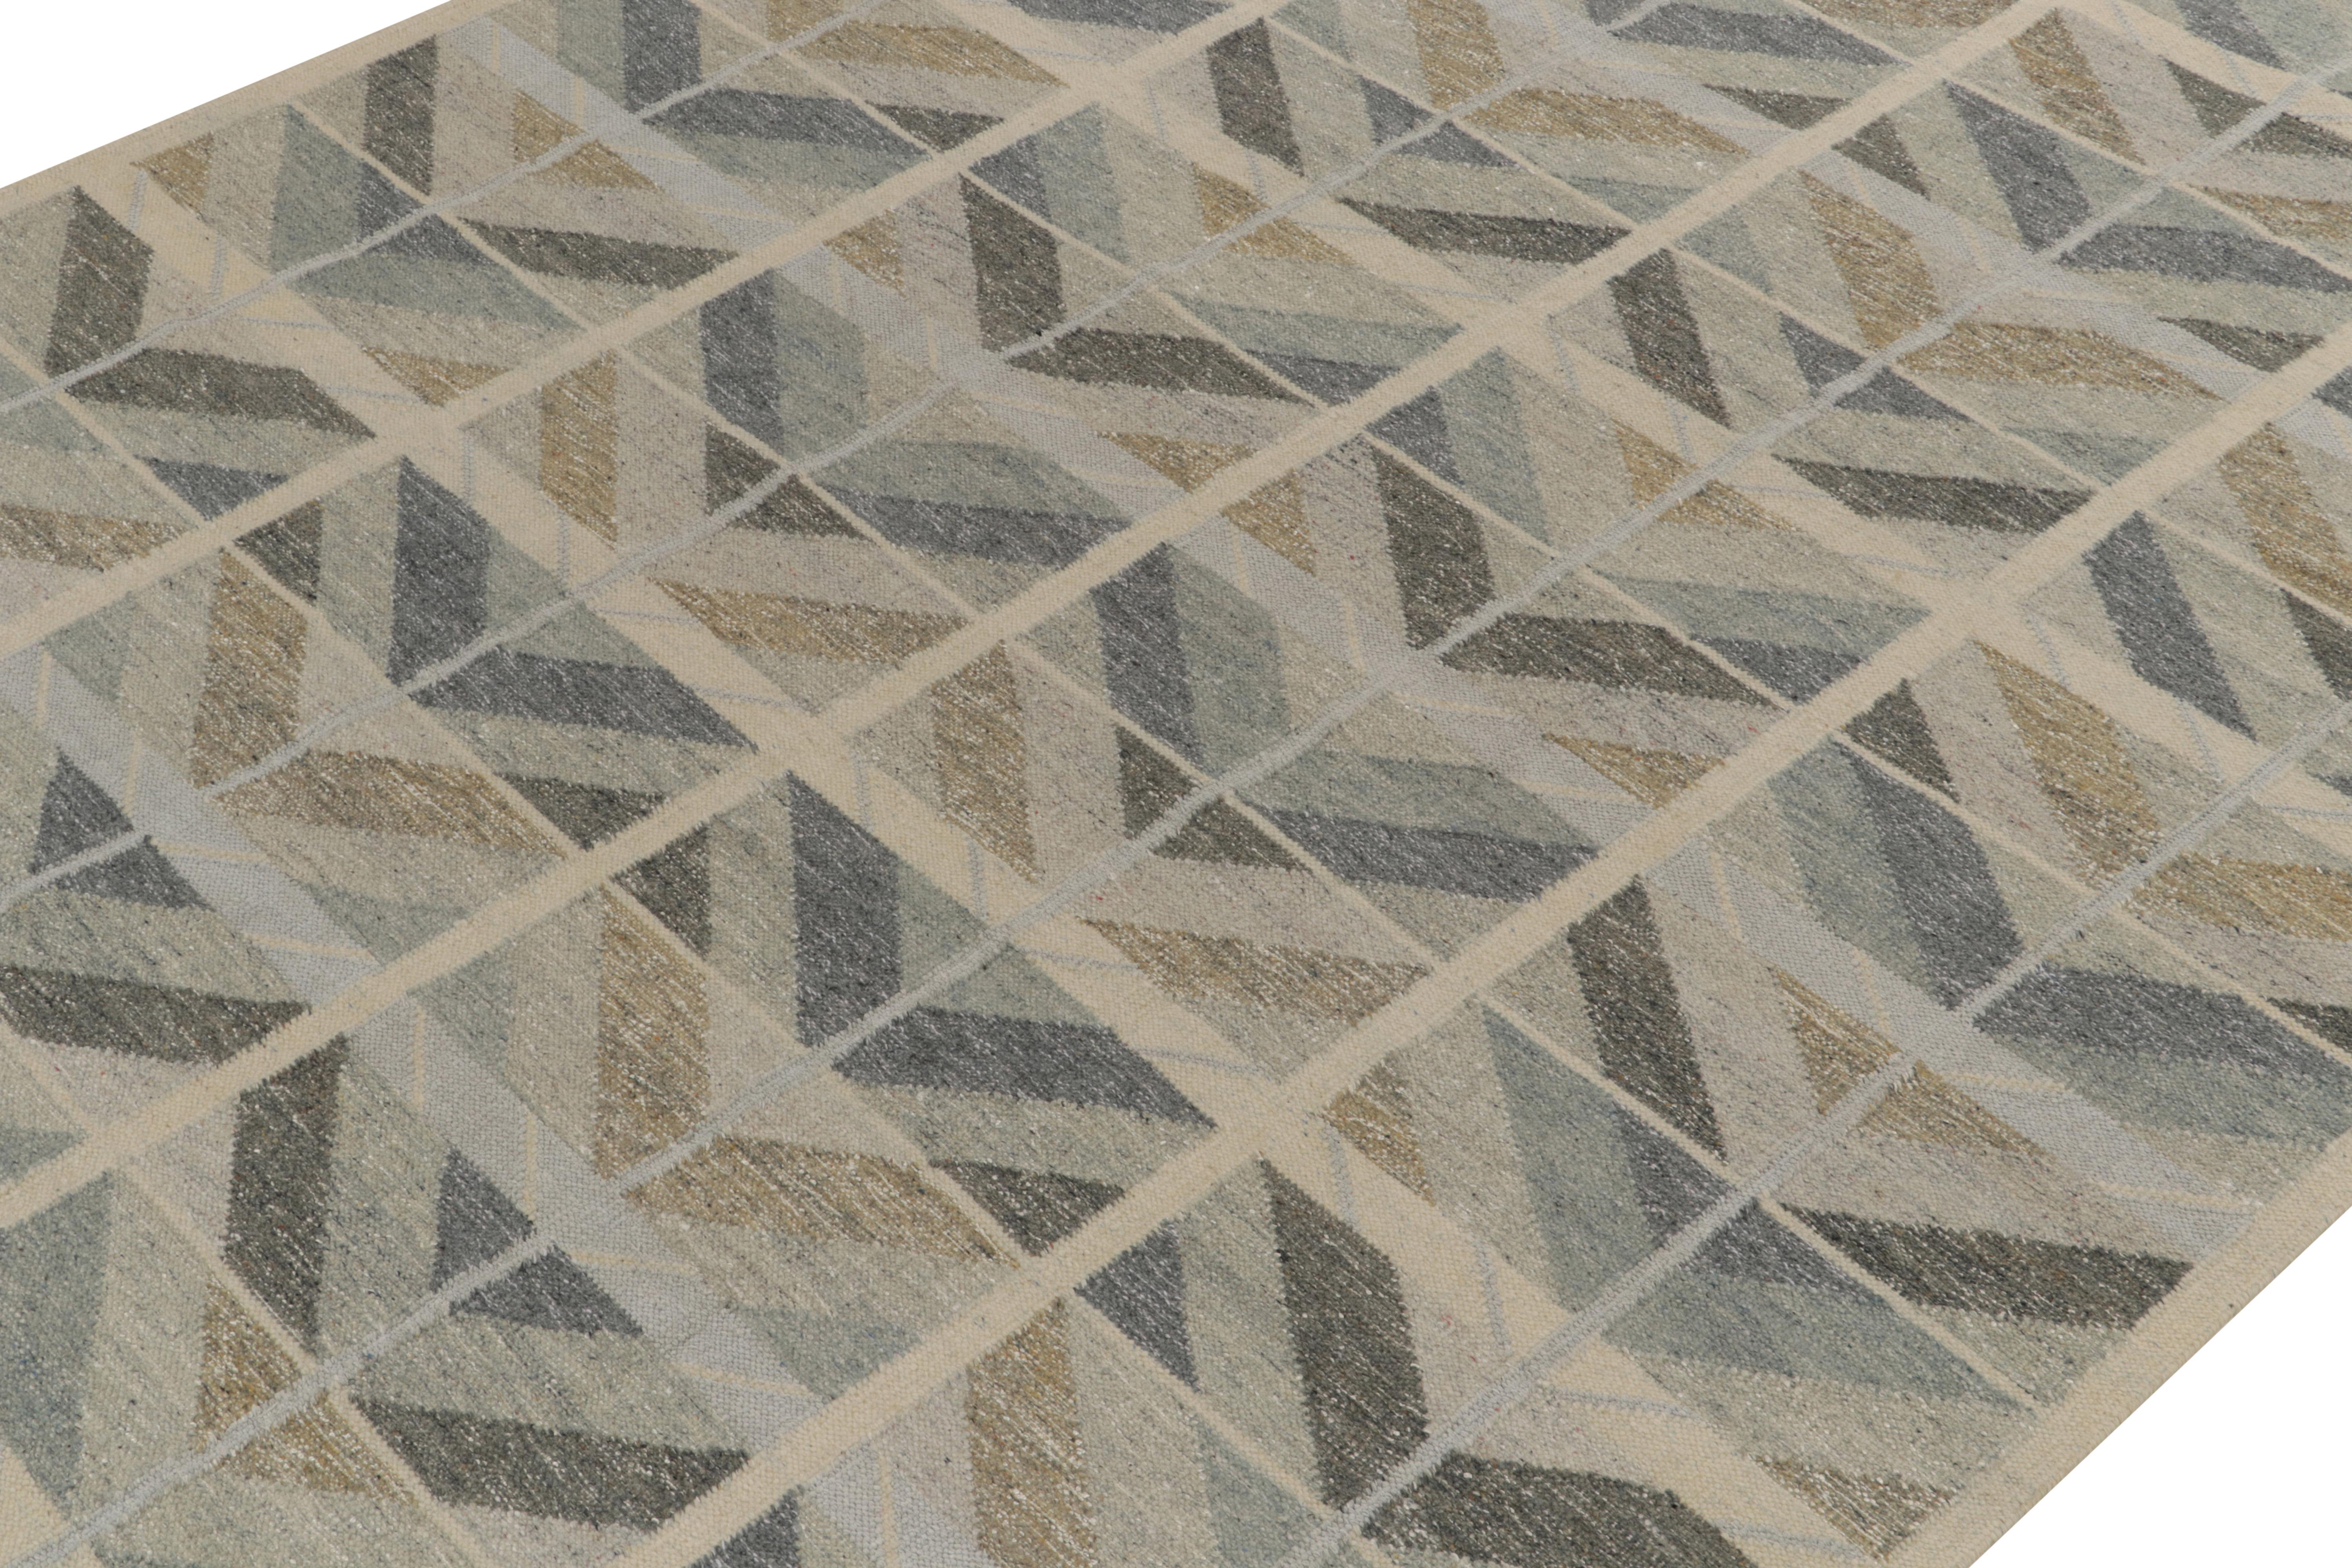 Indian Rug & Kilim’s Scandinavian Style Kilim in Grey, Beige and Blue Chevron Patterns For Sale